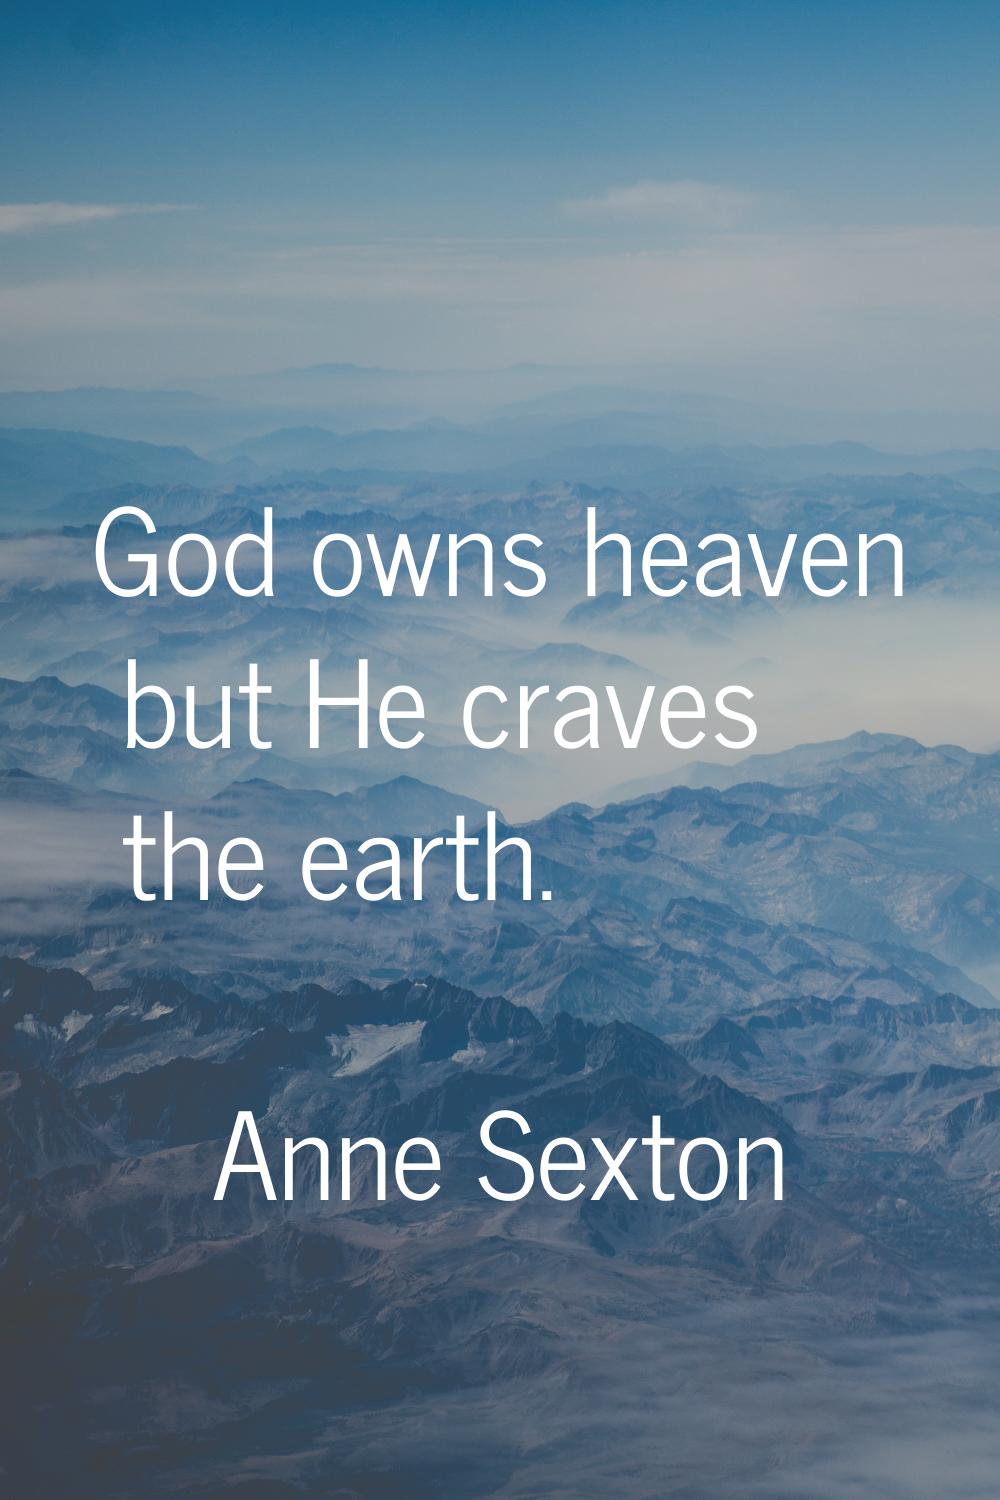 God owns heaven but He craves the earth.